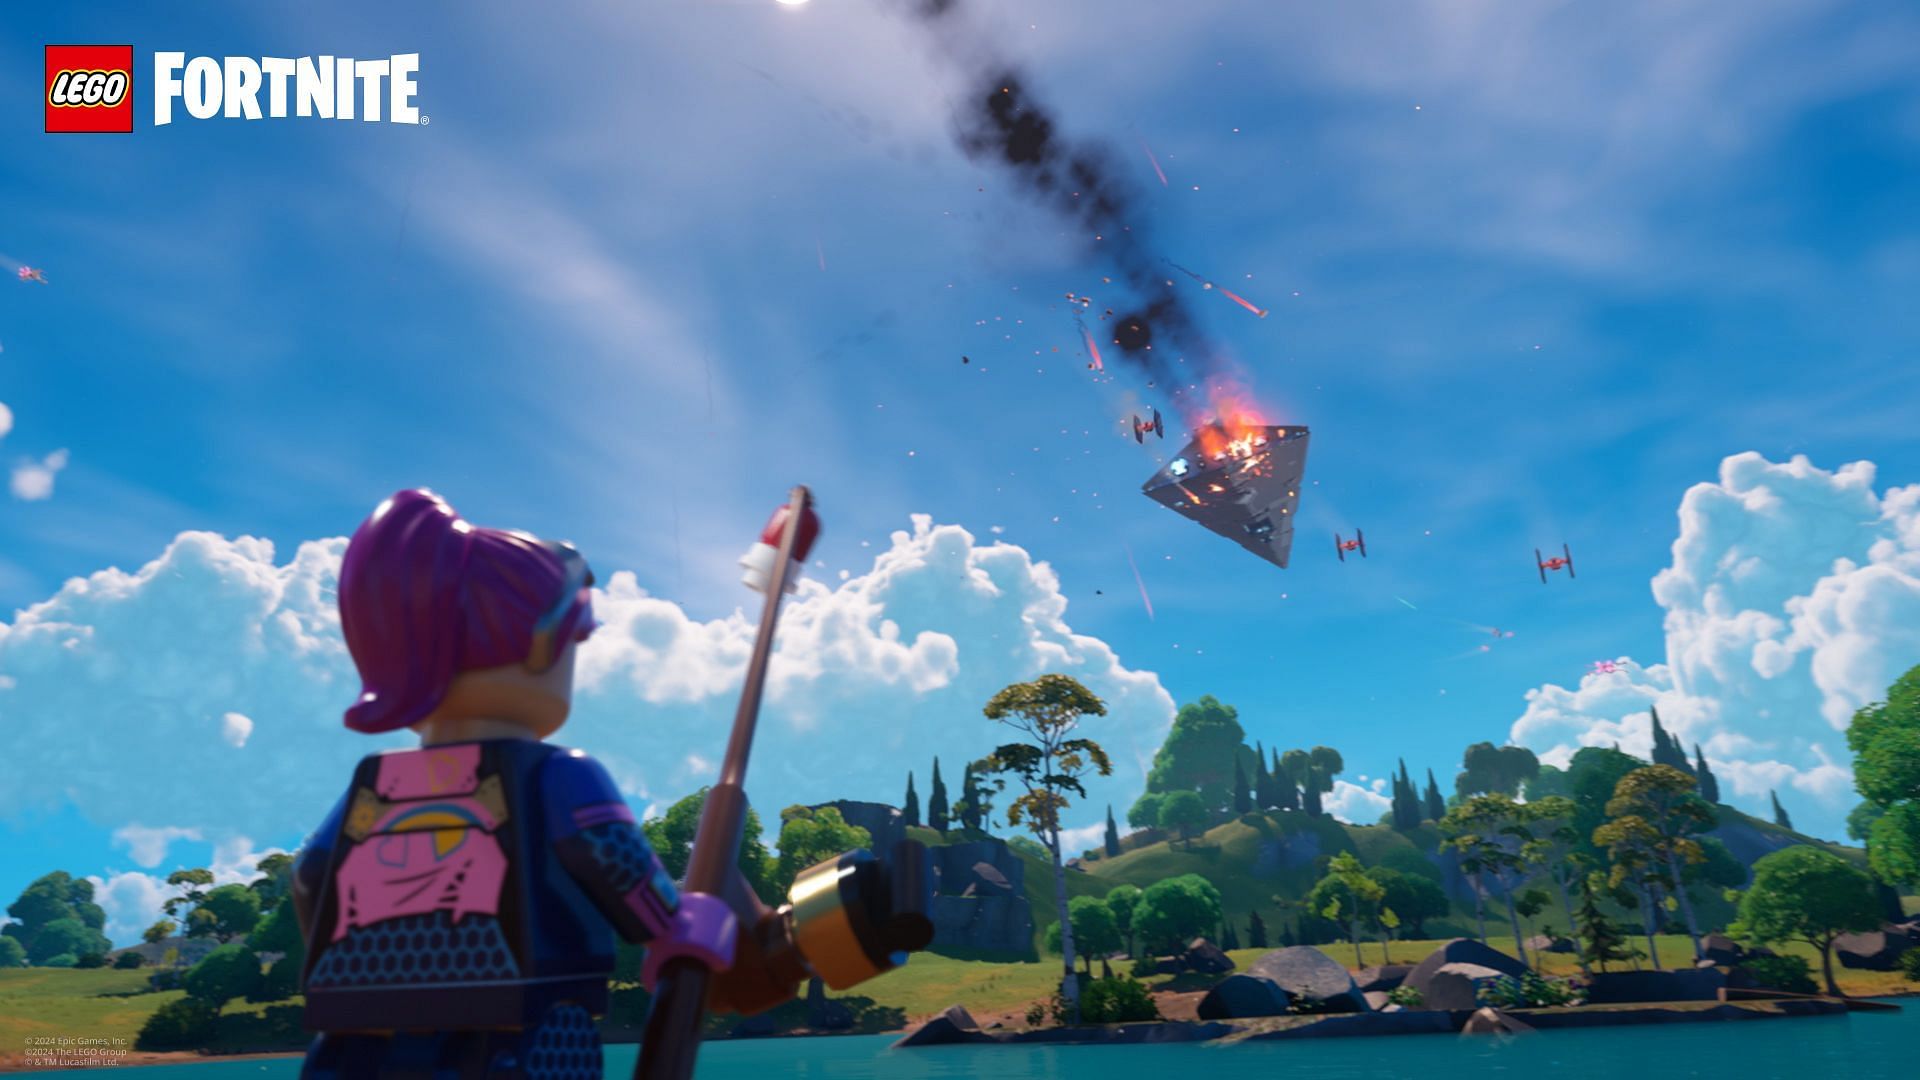 Fortnite v29.40 update early patch notes: LEGO Star Wars collaboration, Darth Vader returns, LEGO Lightsabers, and more